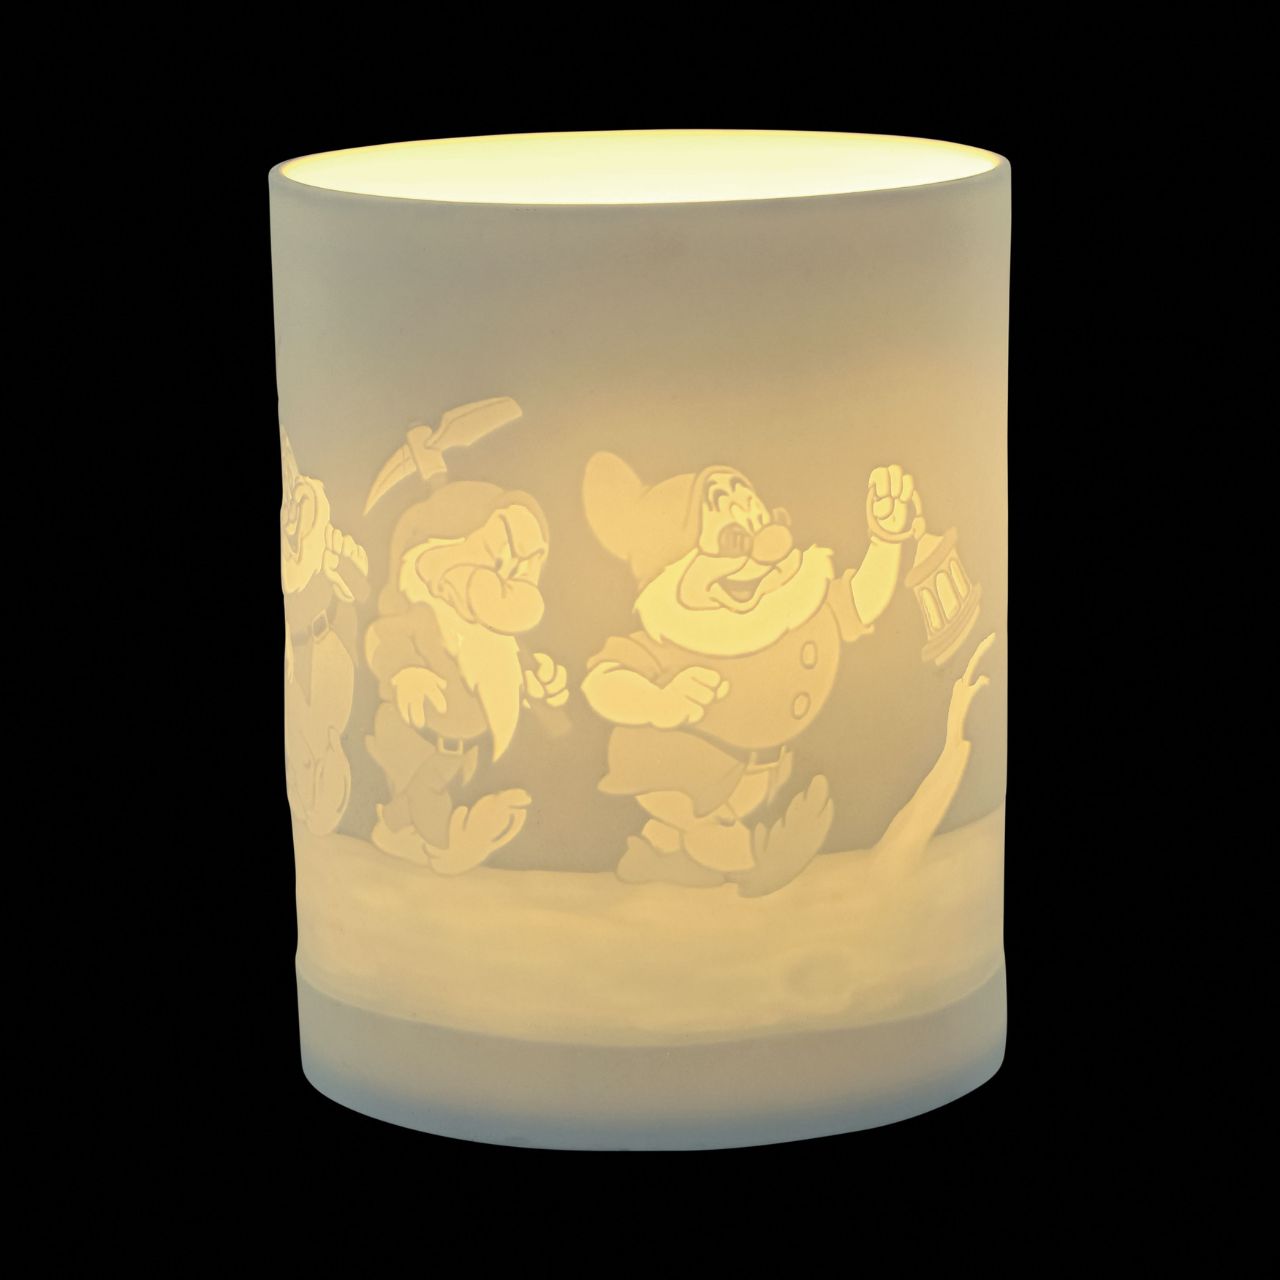 Snow White & The Seven Dwarfs Porcelain Tea Light Holder  The Seven Dwarfs will seem as if they are returning home from work when you light the LED candle and they flicker across your room creating a warm night light. The Seven Dwarf characters from Disney's Snow White are etched into the thin translucent porcelain.